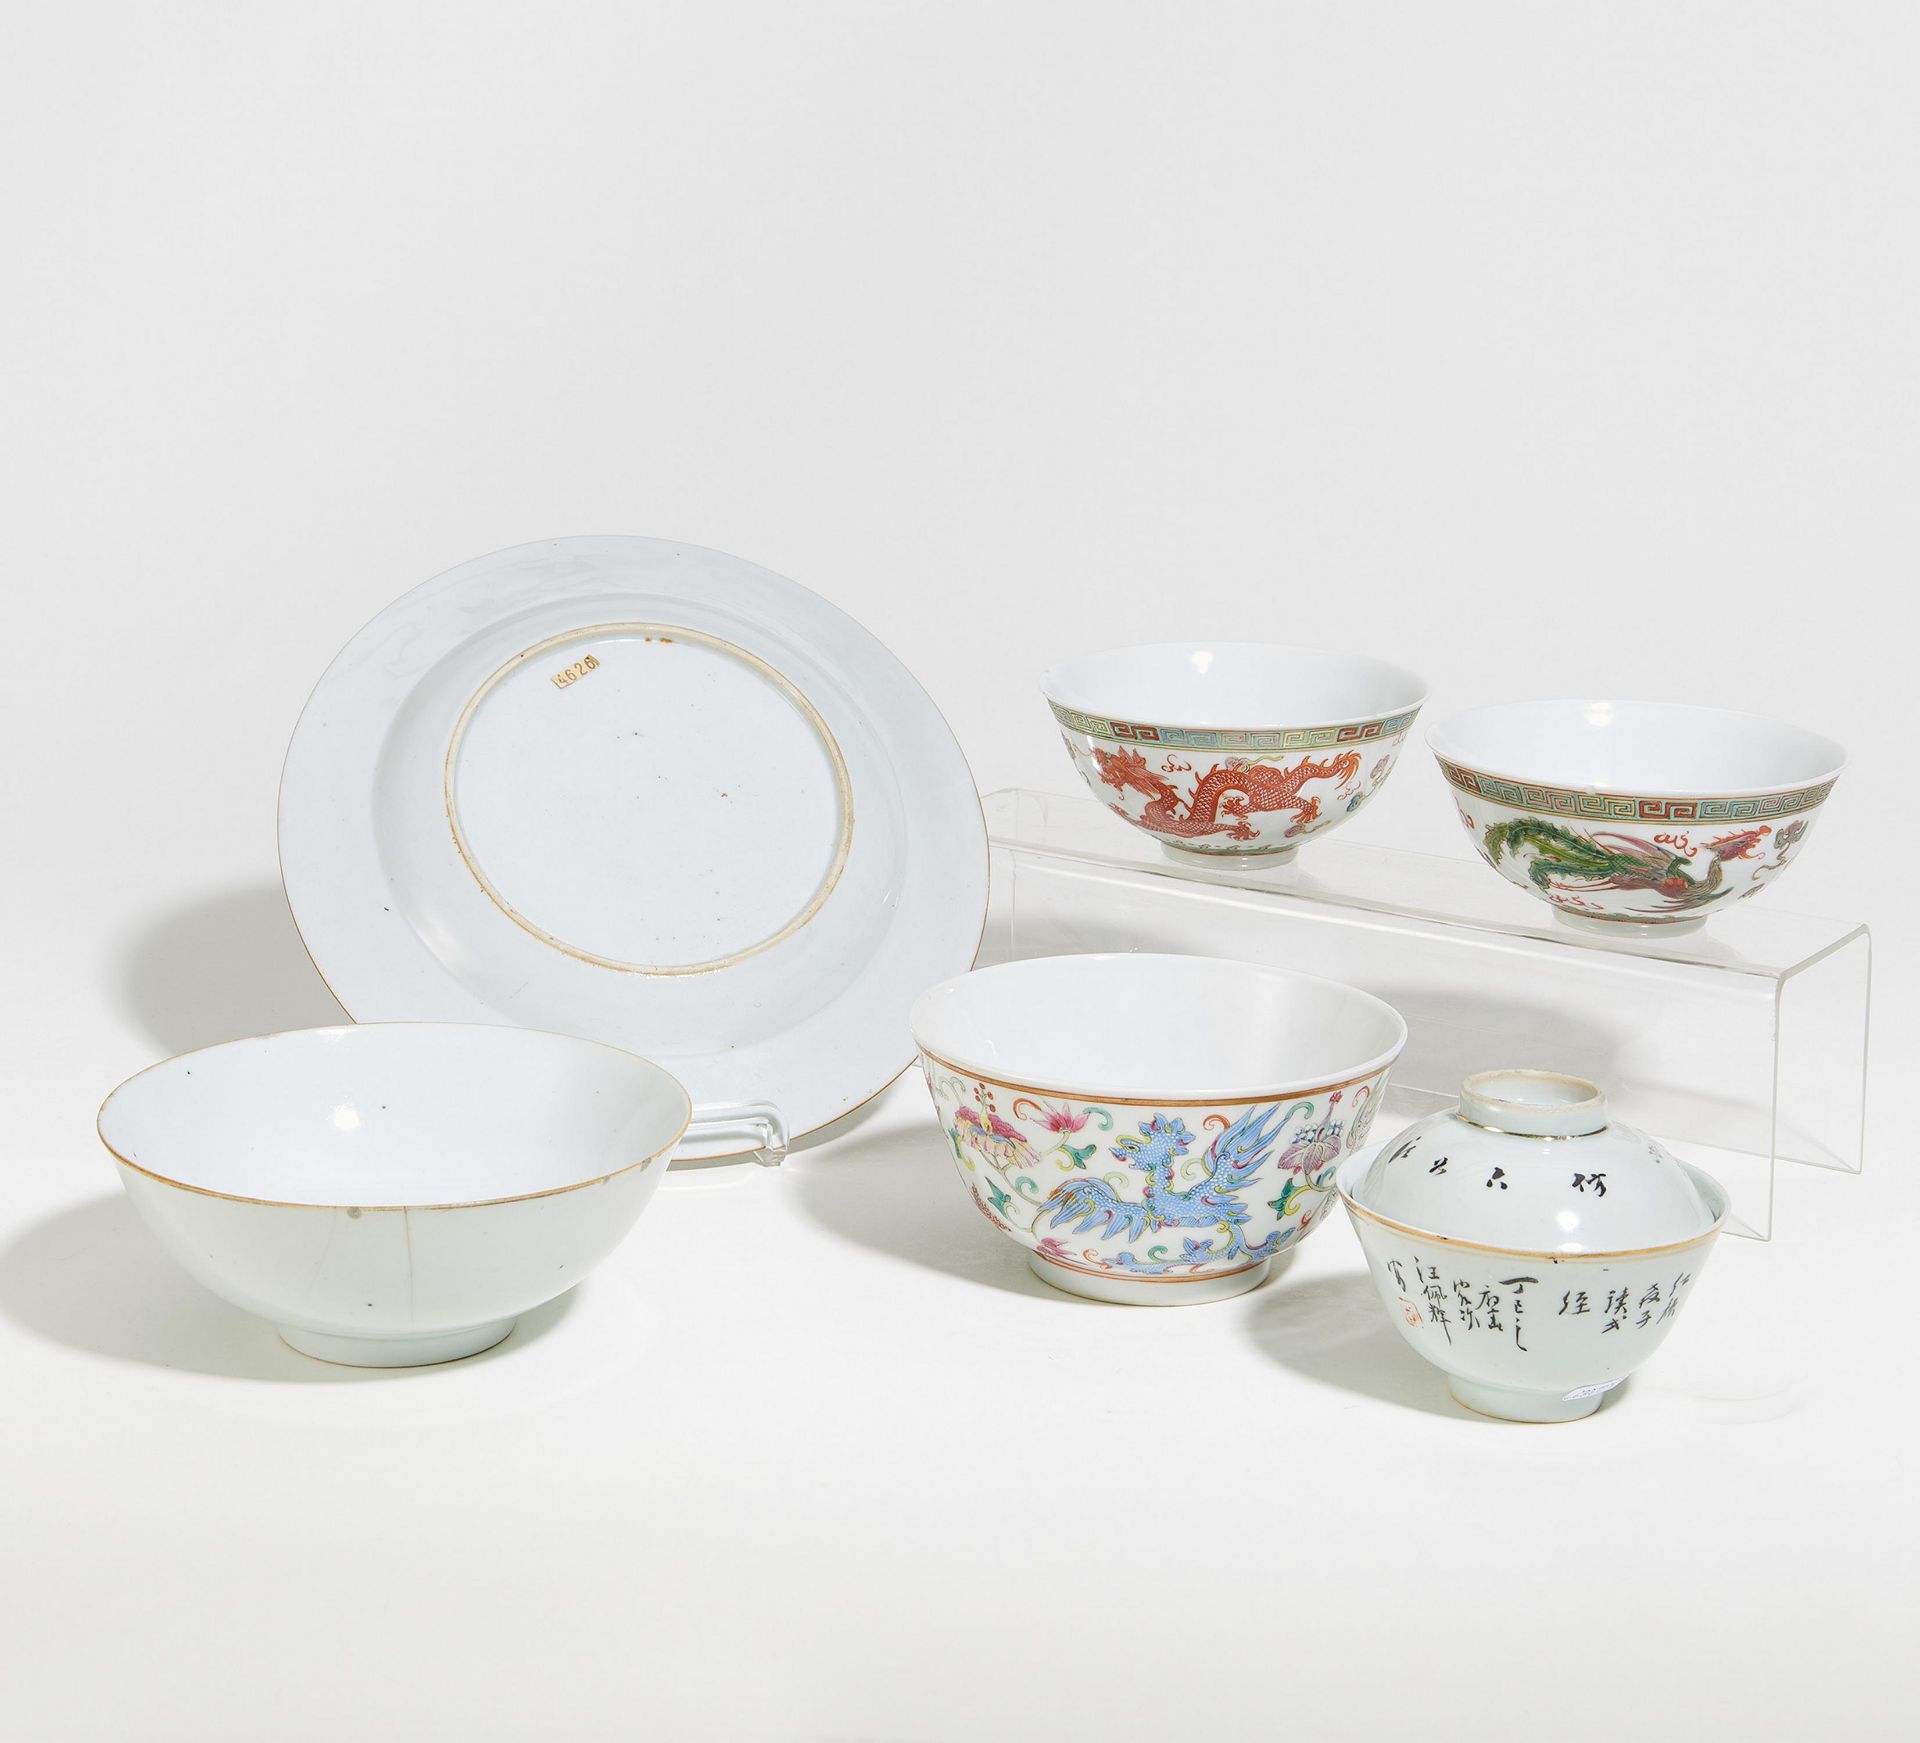 LOT OF SIX PORCELAIN PIECES. Origin: China. Dynasty: Qing dynasty and later. Date: 18th-20th c. - Bild 2 aus 9